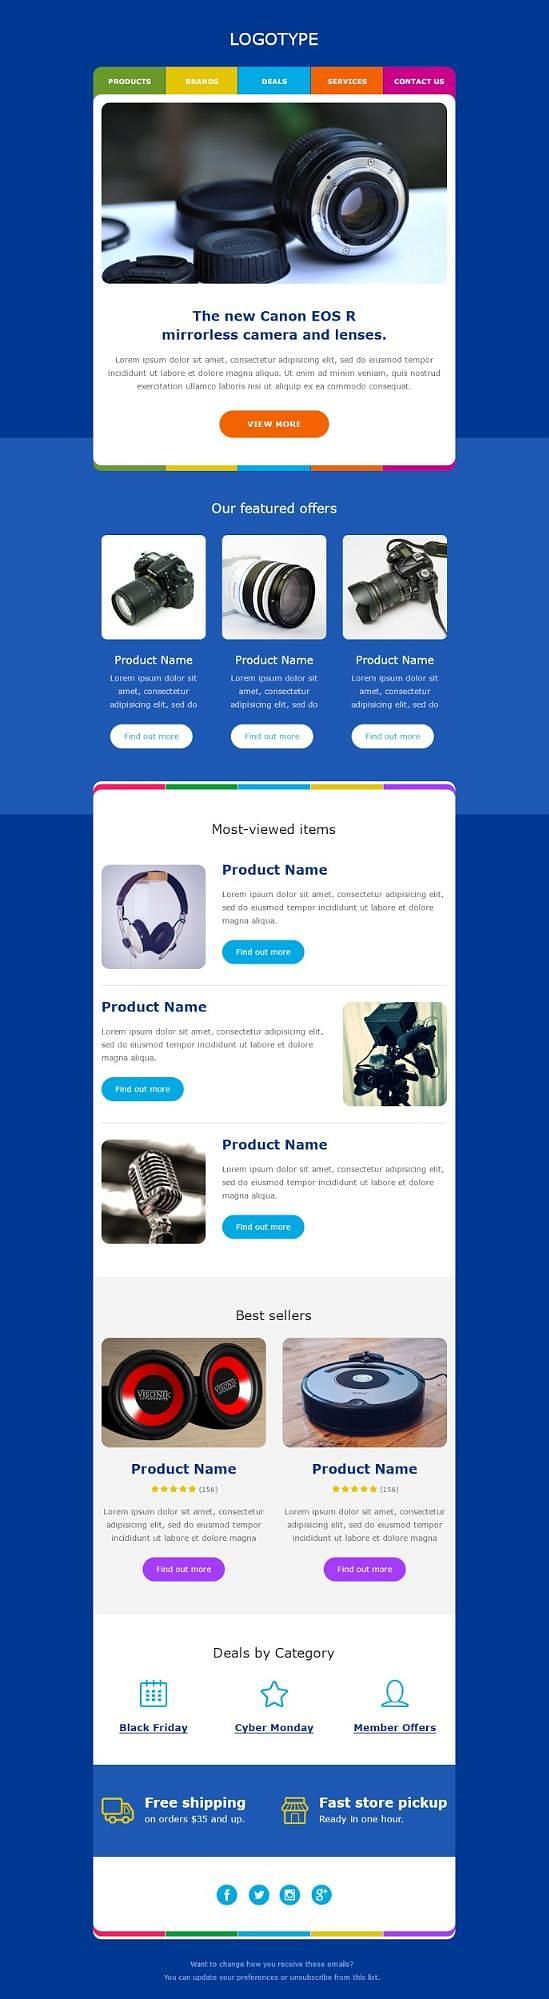 Featured email templates from SendX